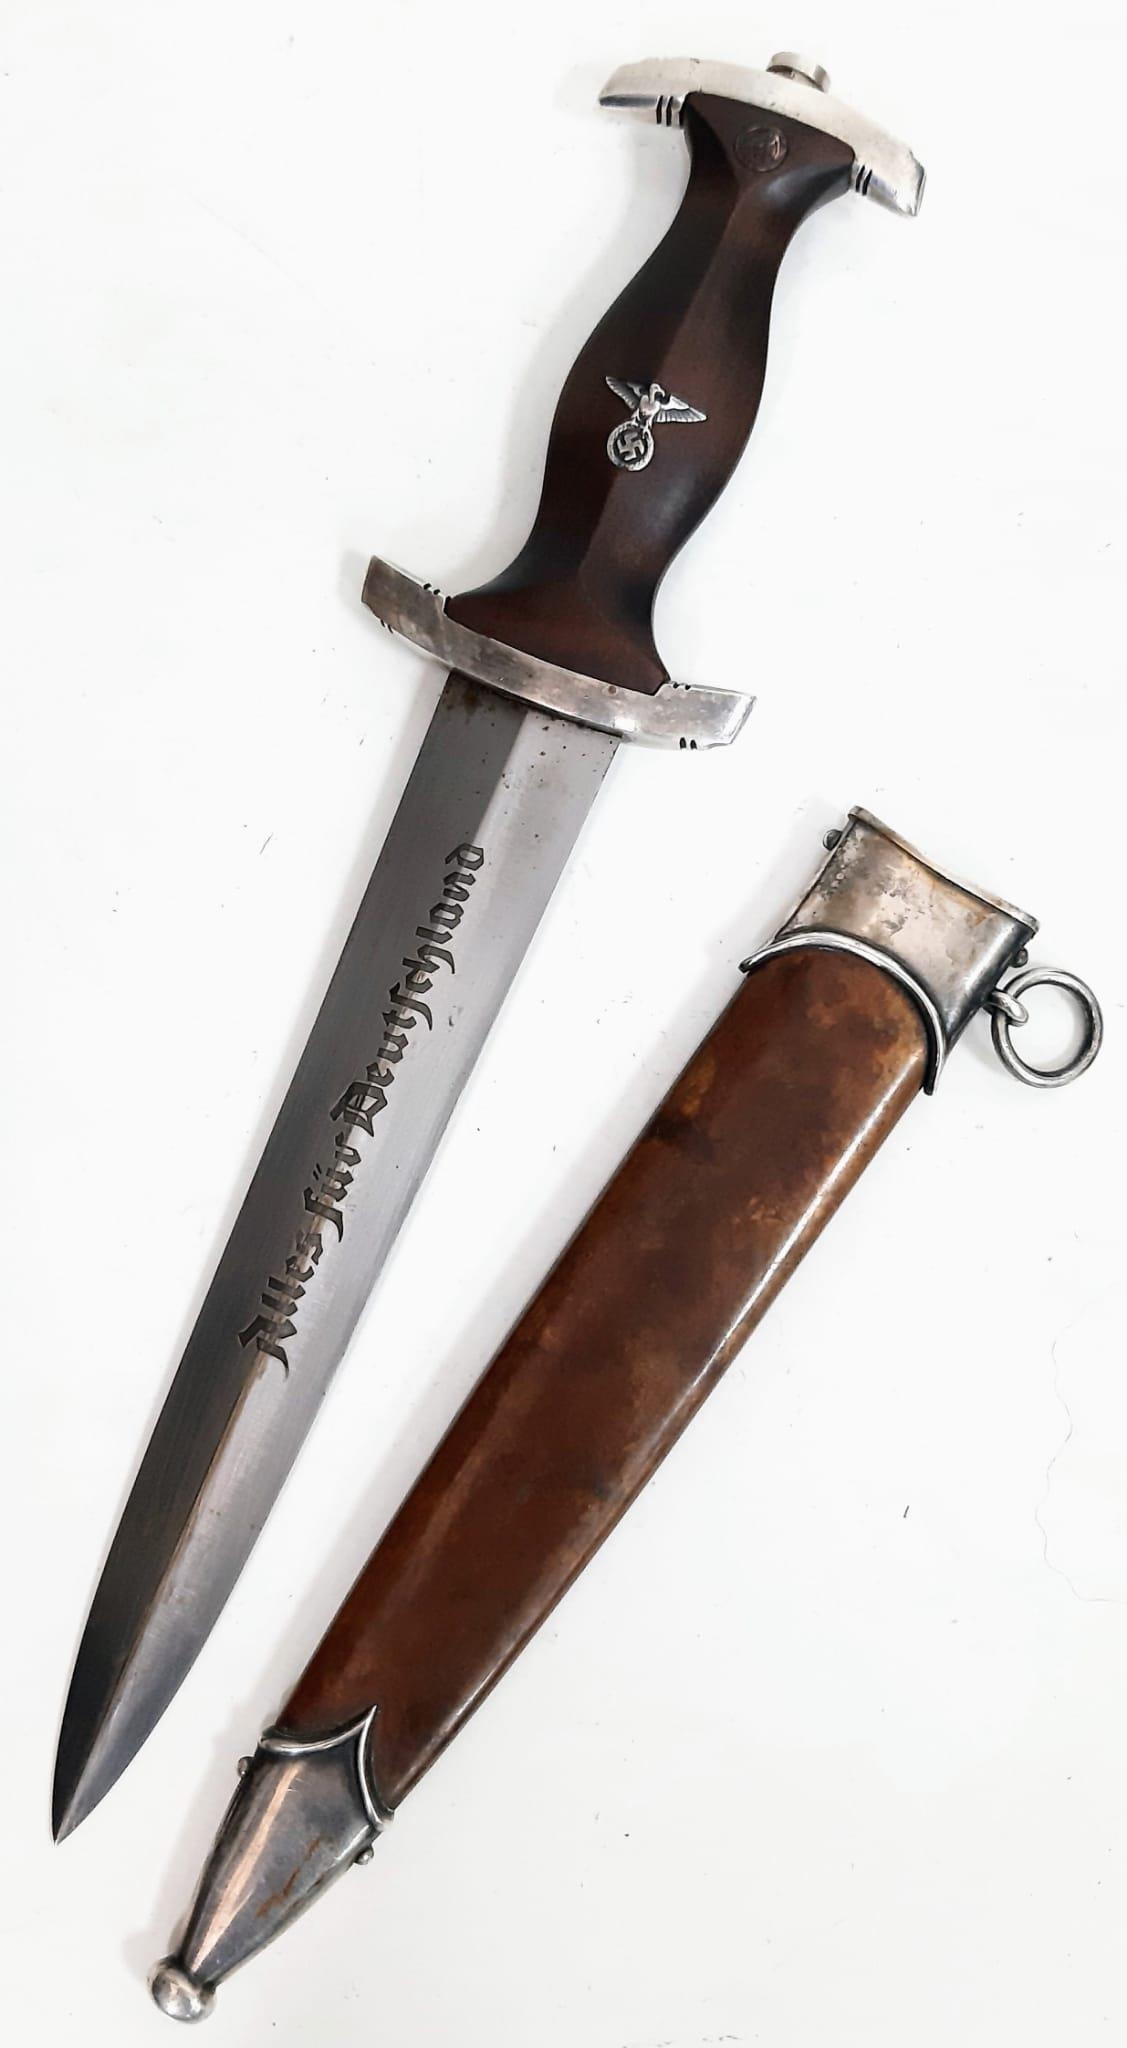 Very Rare 3rd Reich Sturmabteilung (Storm Detachment) Dagger. This is one of the very first produced